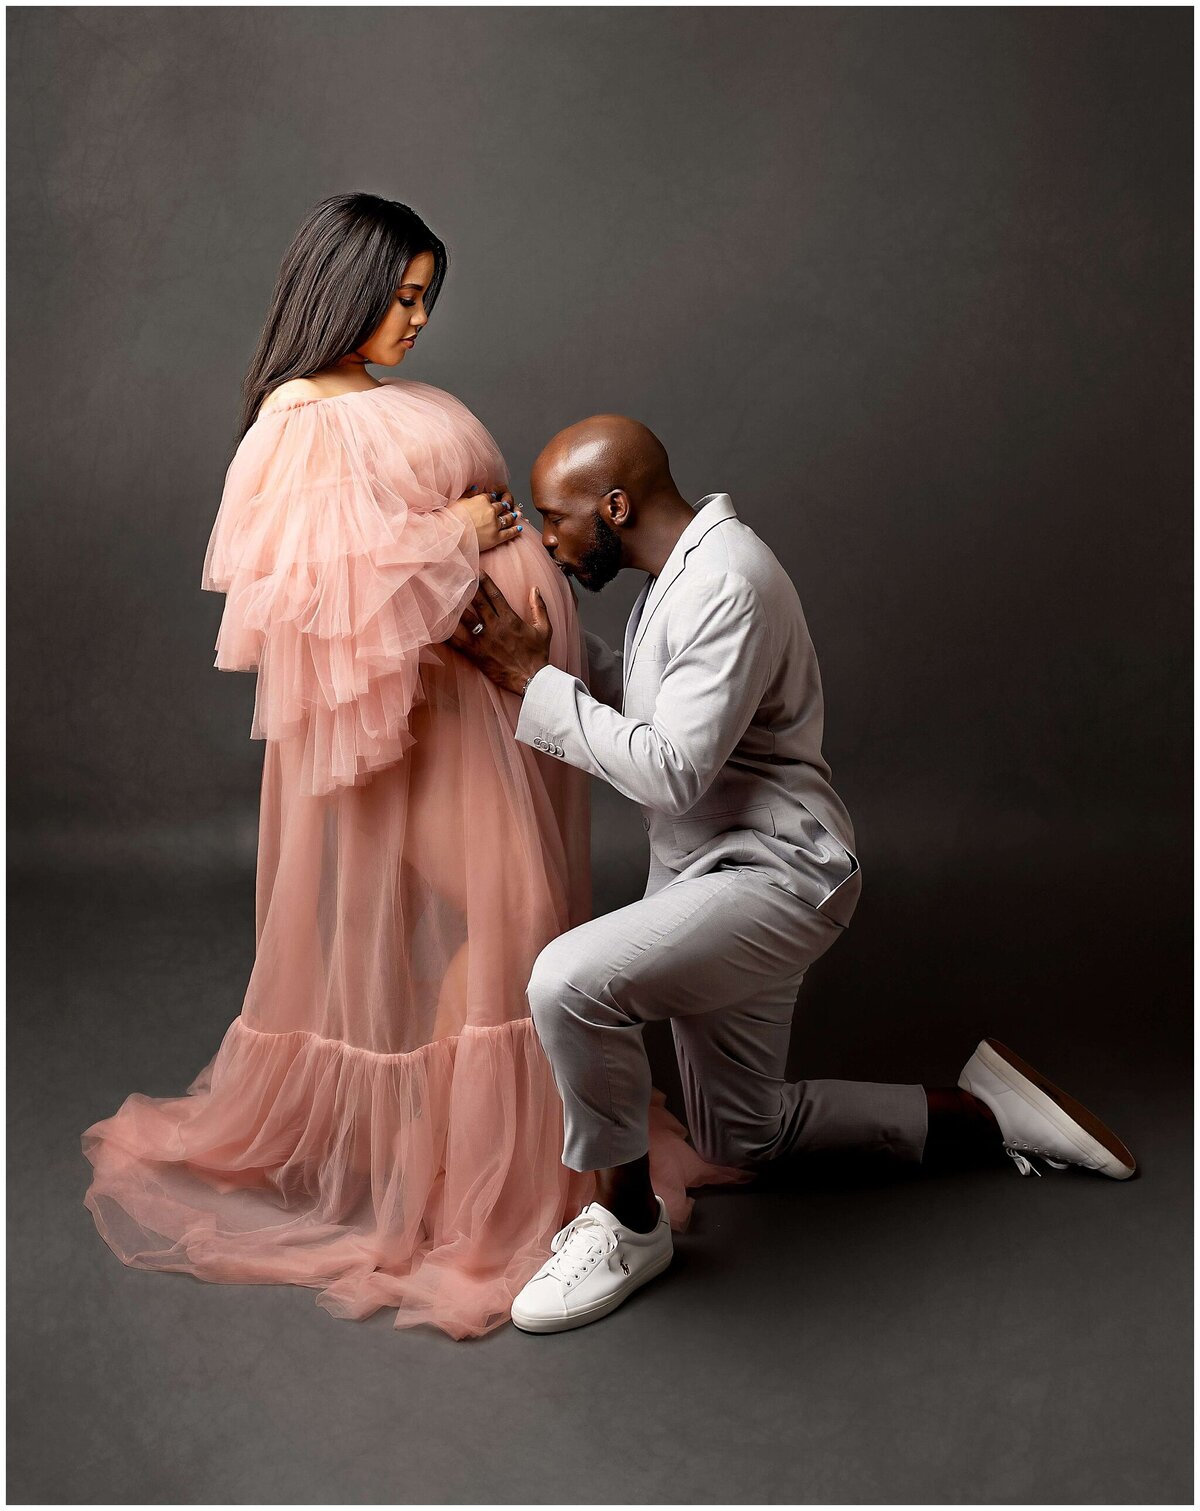 A couple in a maternity photoshoot, with the father kneeling down and tenderly kissing the pregnant belly of his partner. The intimate moment captures the love and anticipation of the couple as they await the arrival of their baby.